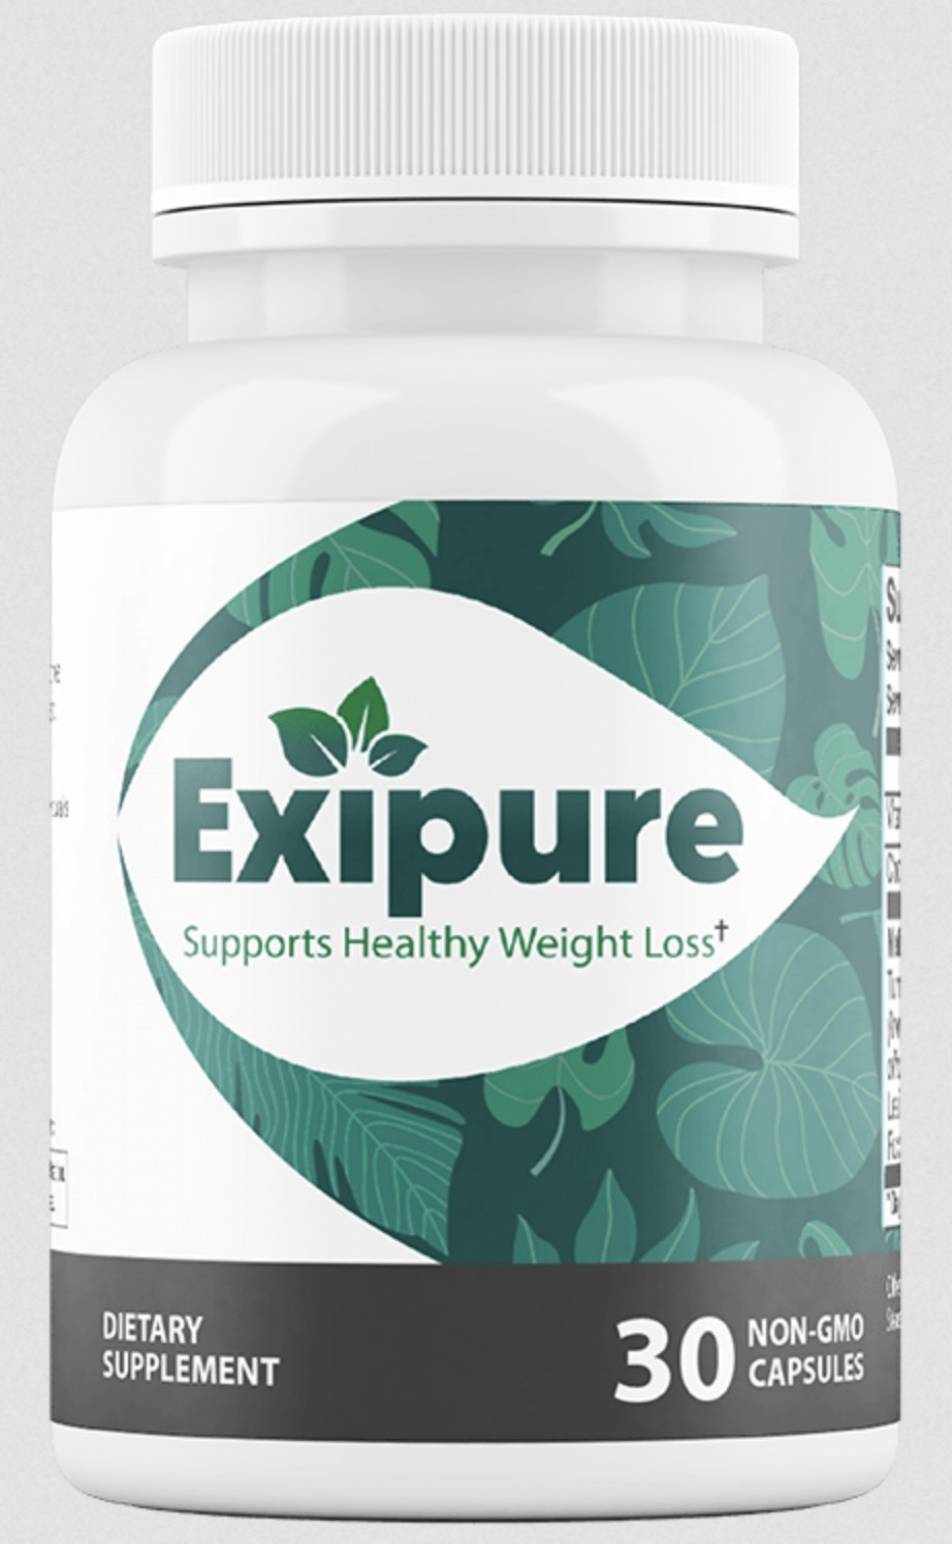 Does Exipure Interact With Any Medications